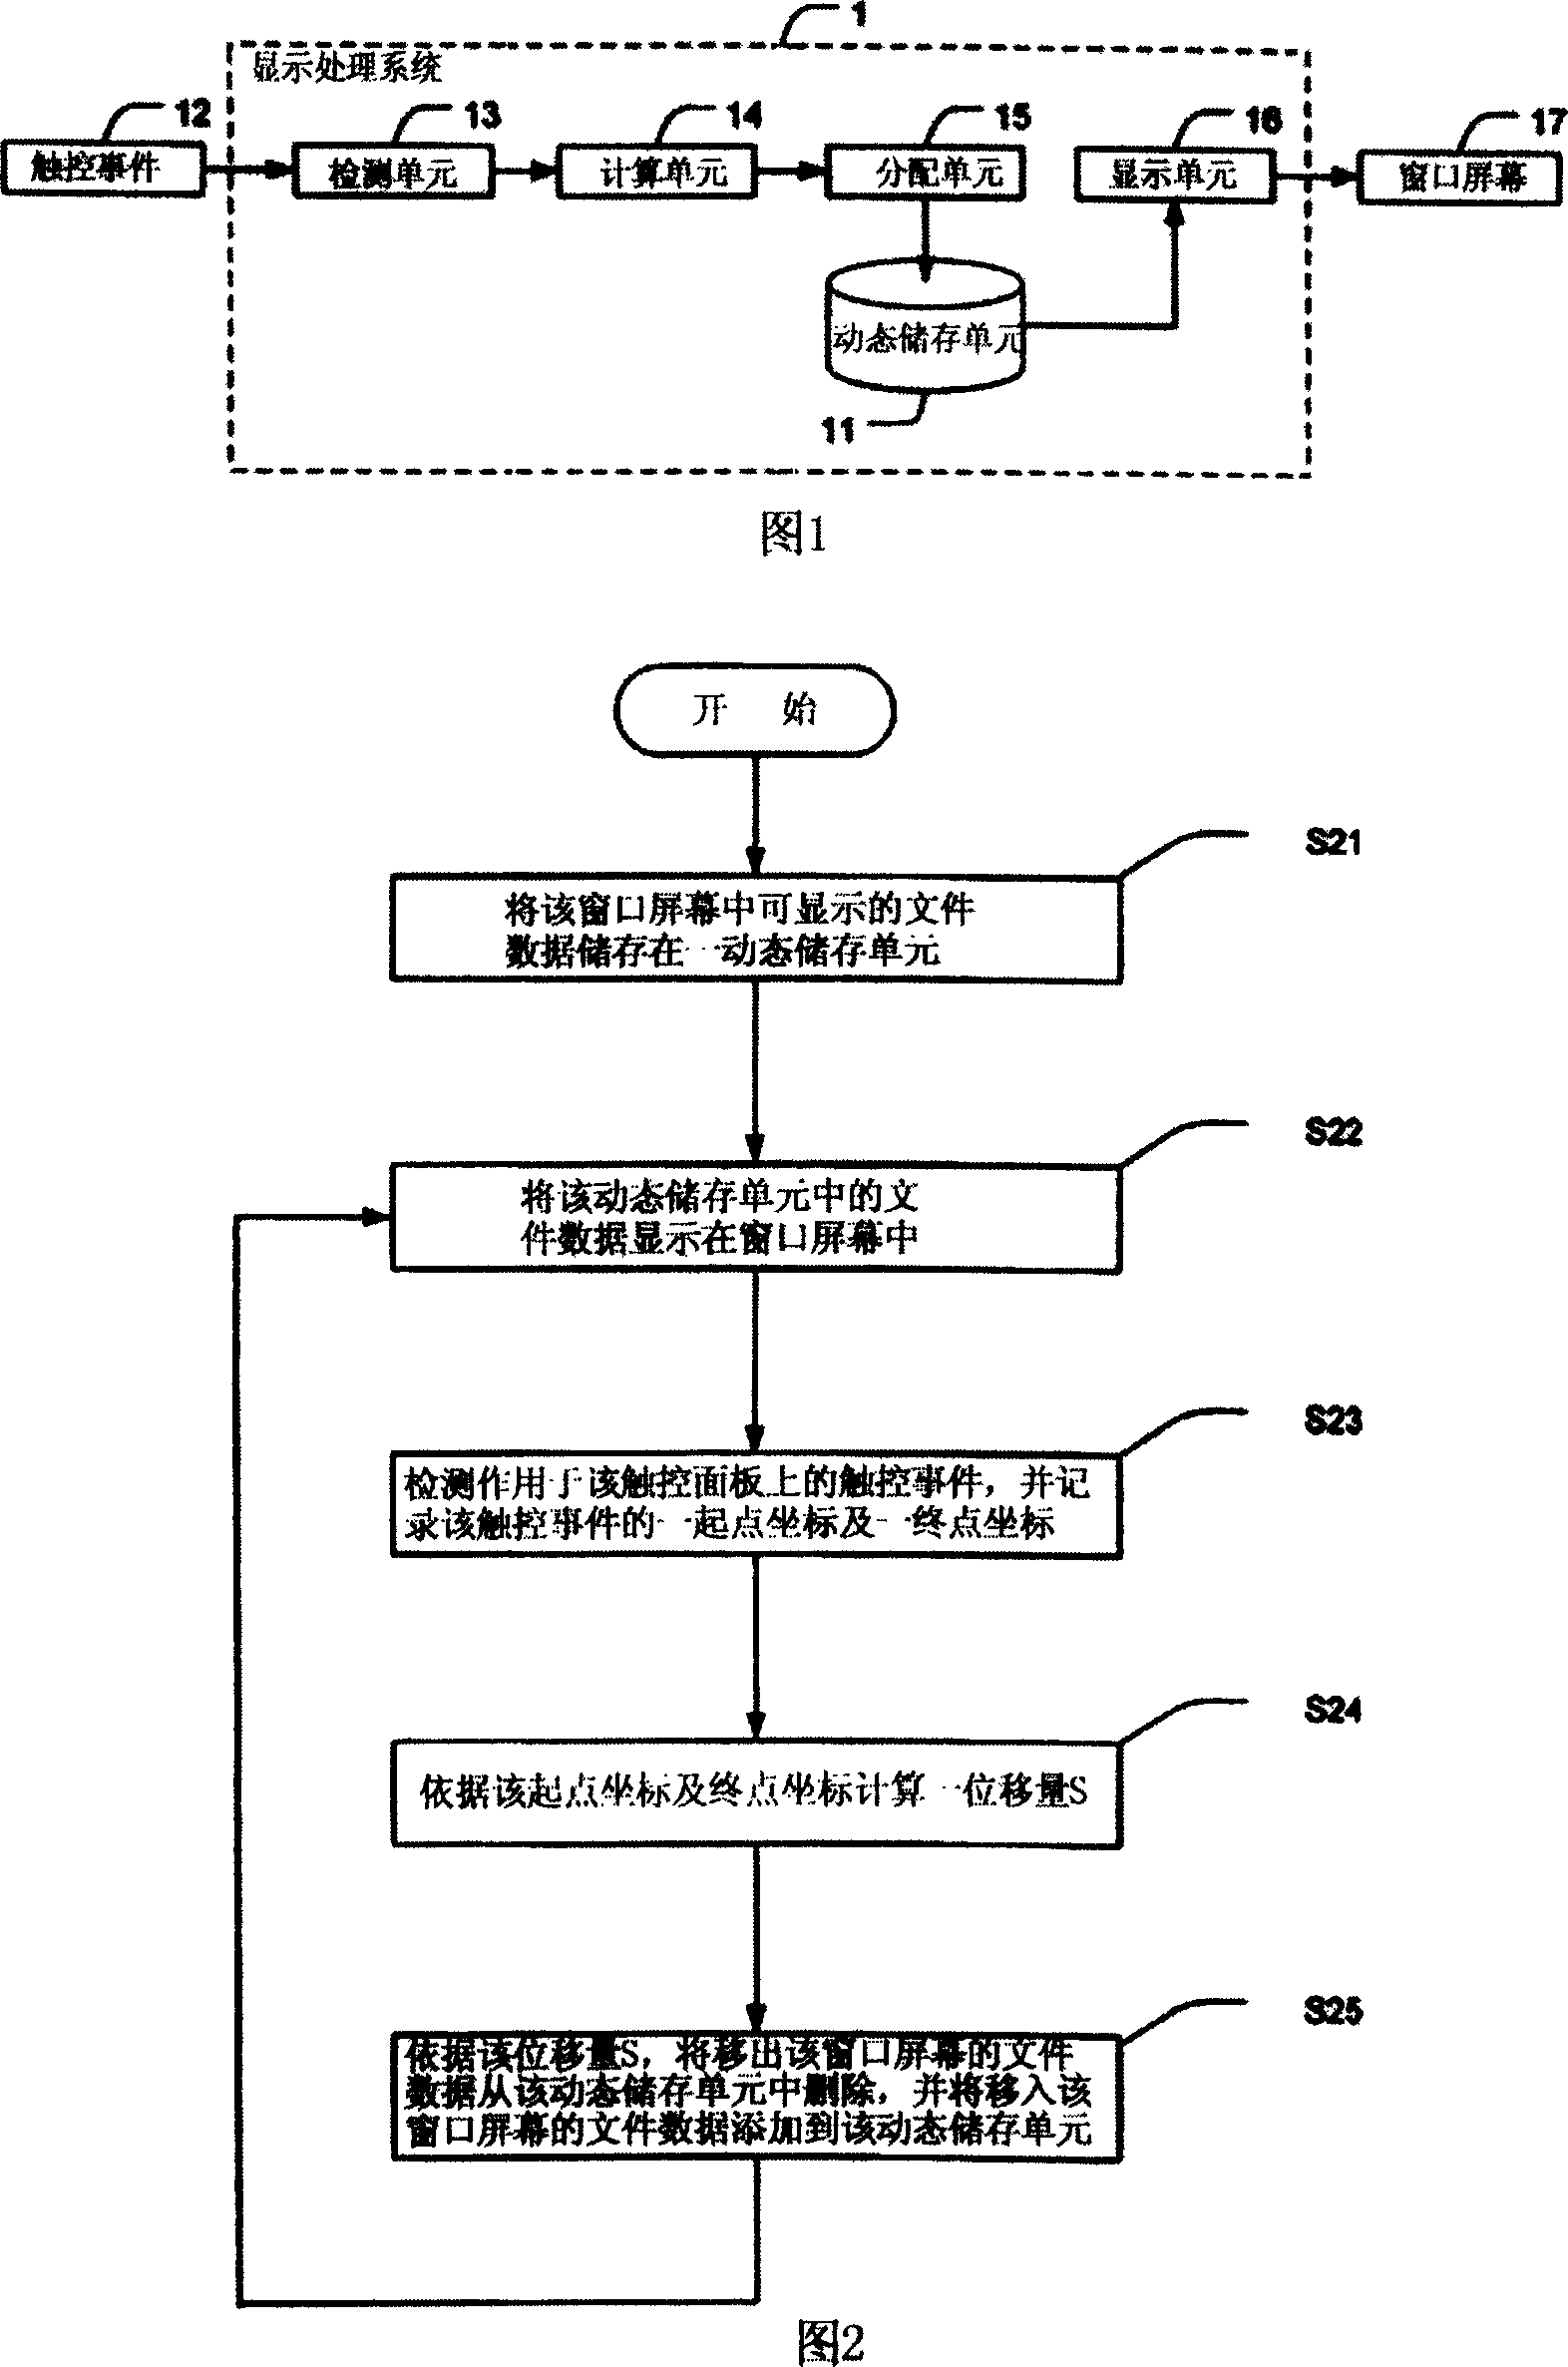 Display processing system and method